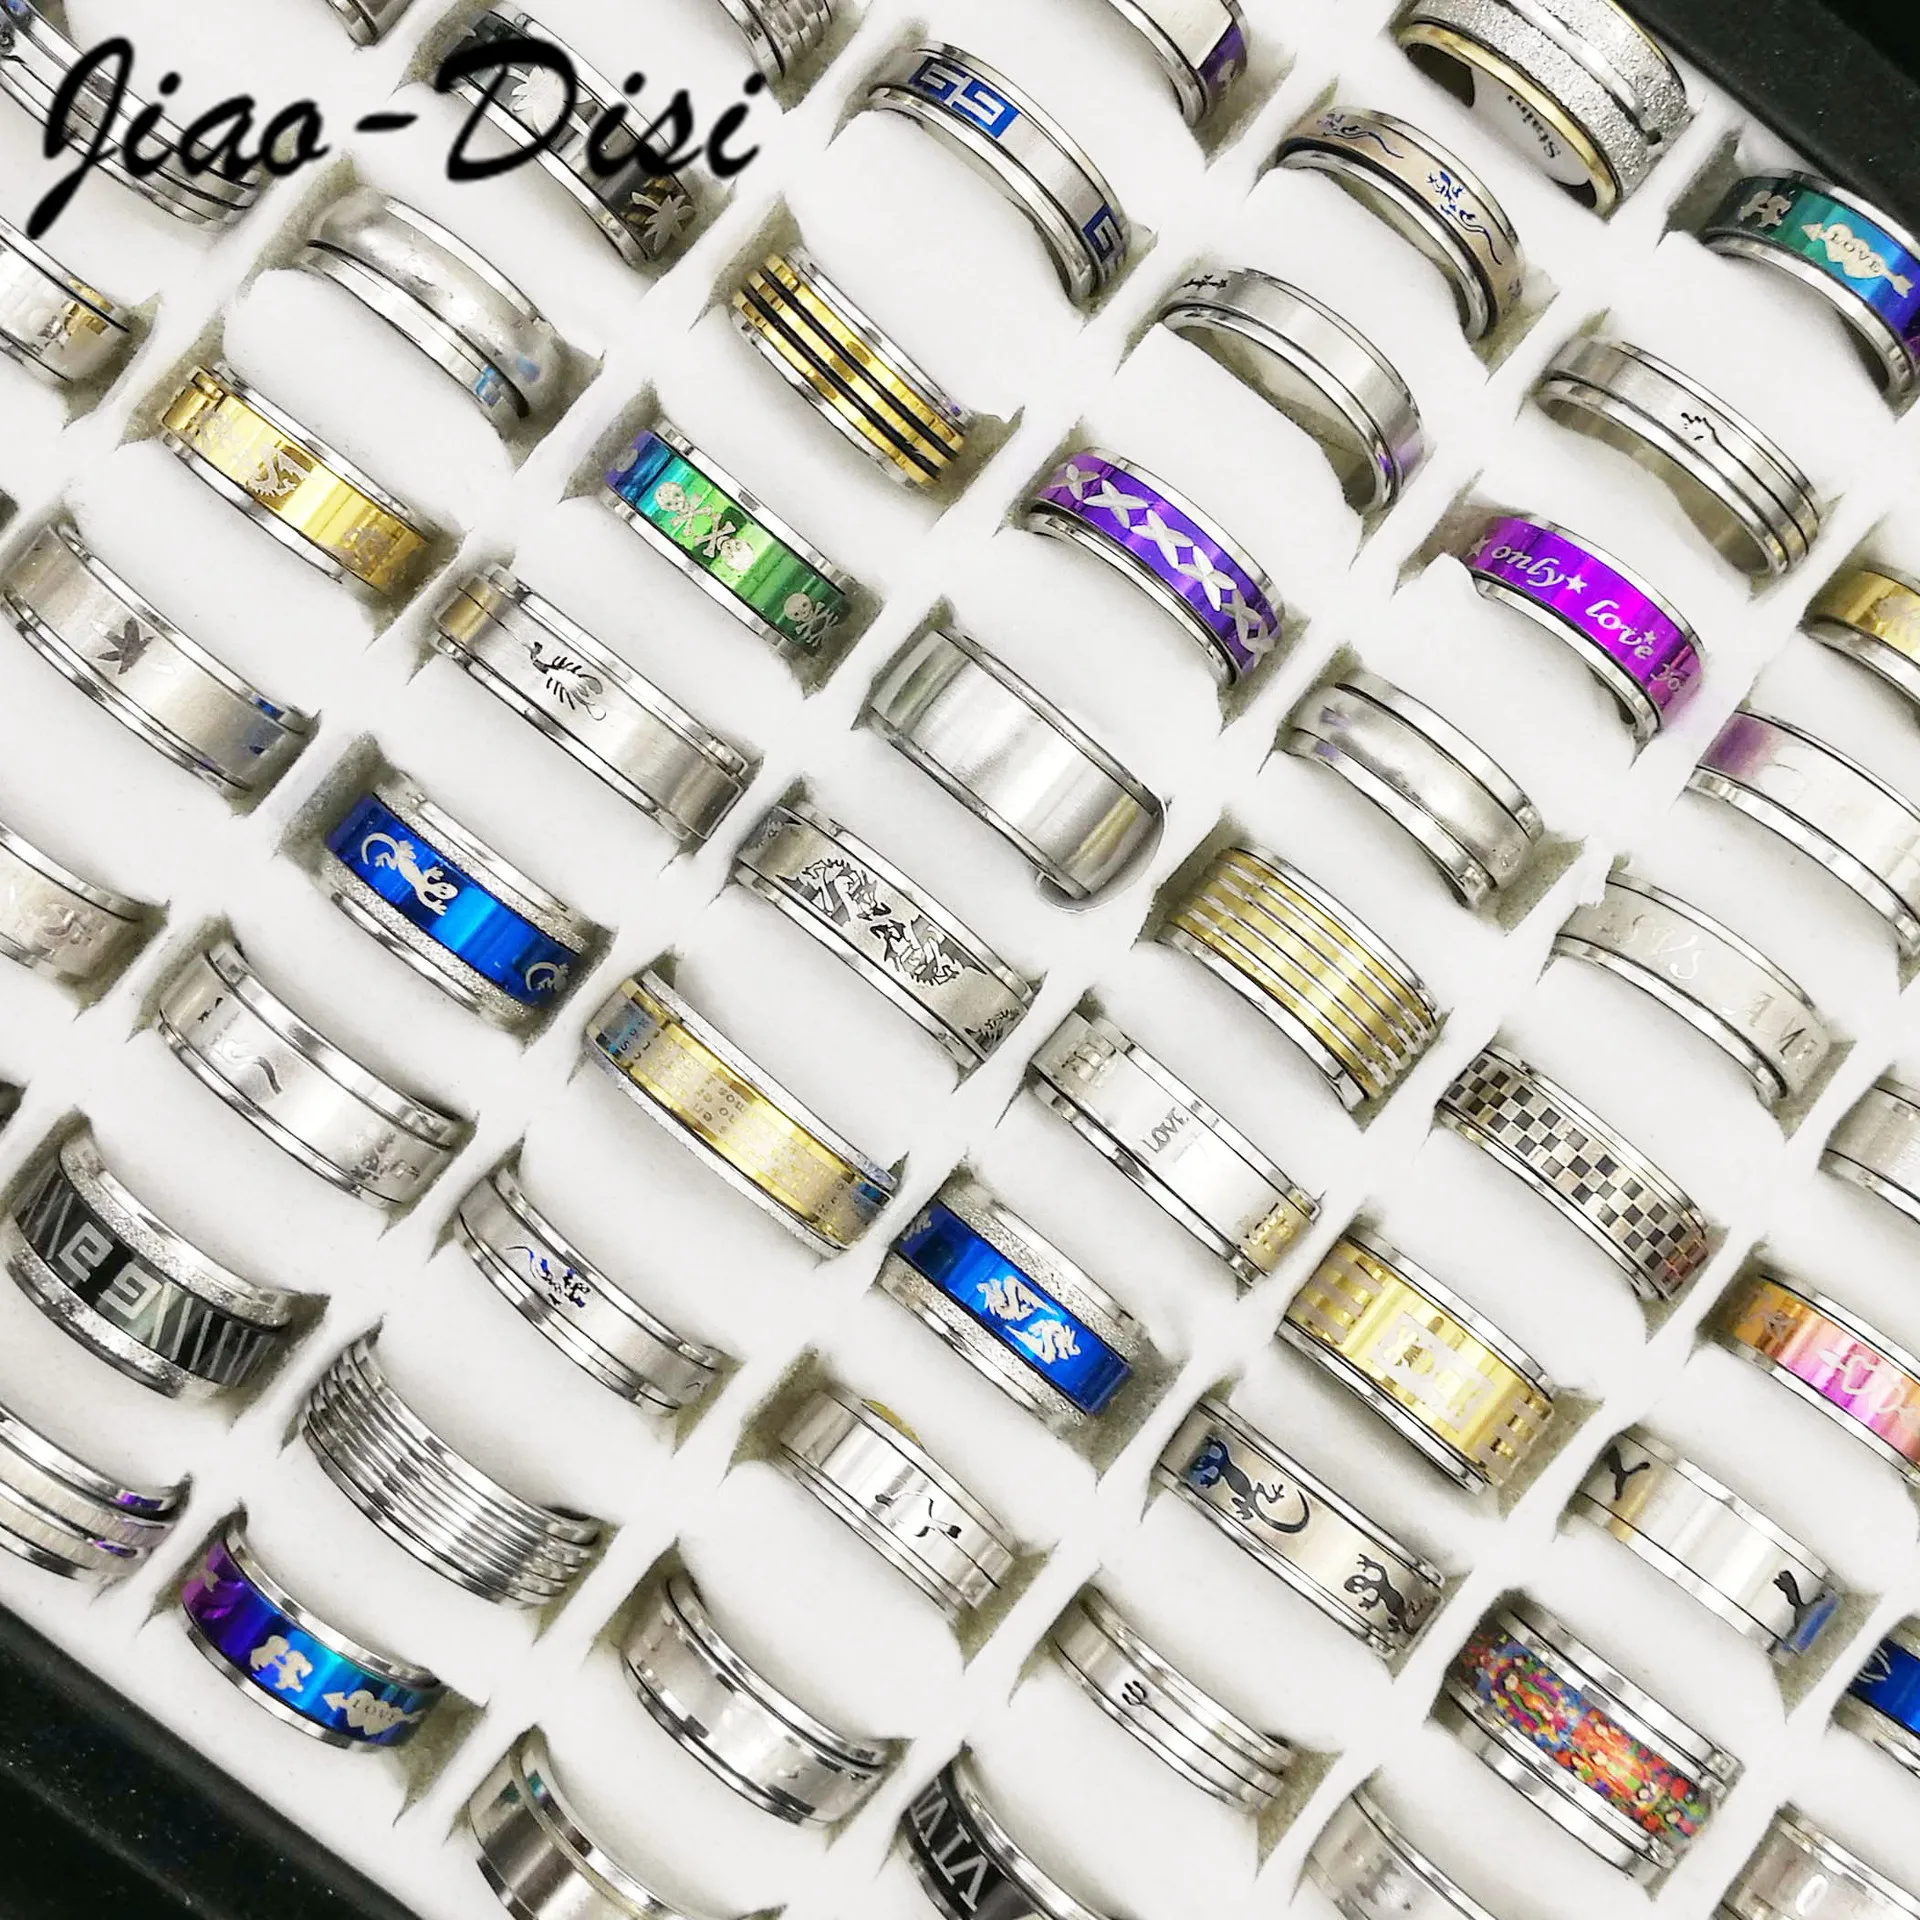 

50PCs/Box Wholesale Stainless Steel Finger Ring For Men Women US Ring Size 5-10 Fashion Jewelry Ring Set Anillo De Dedo Aneis